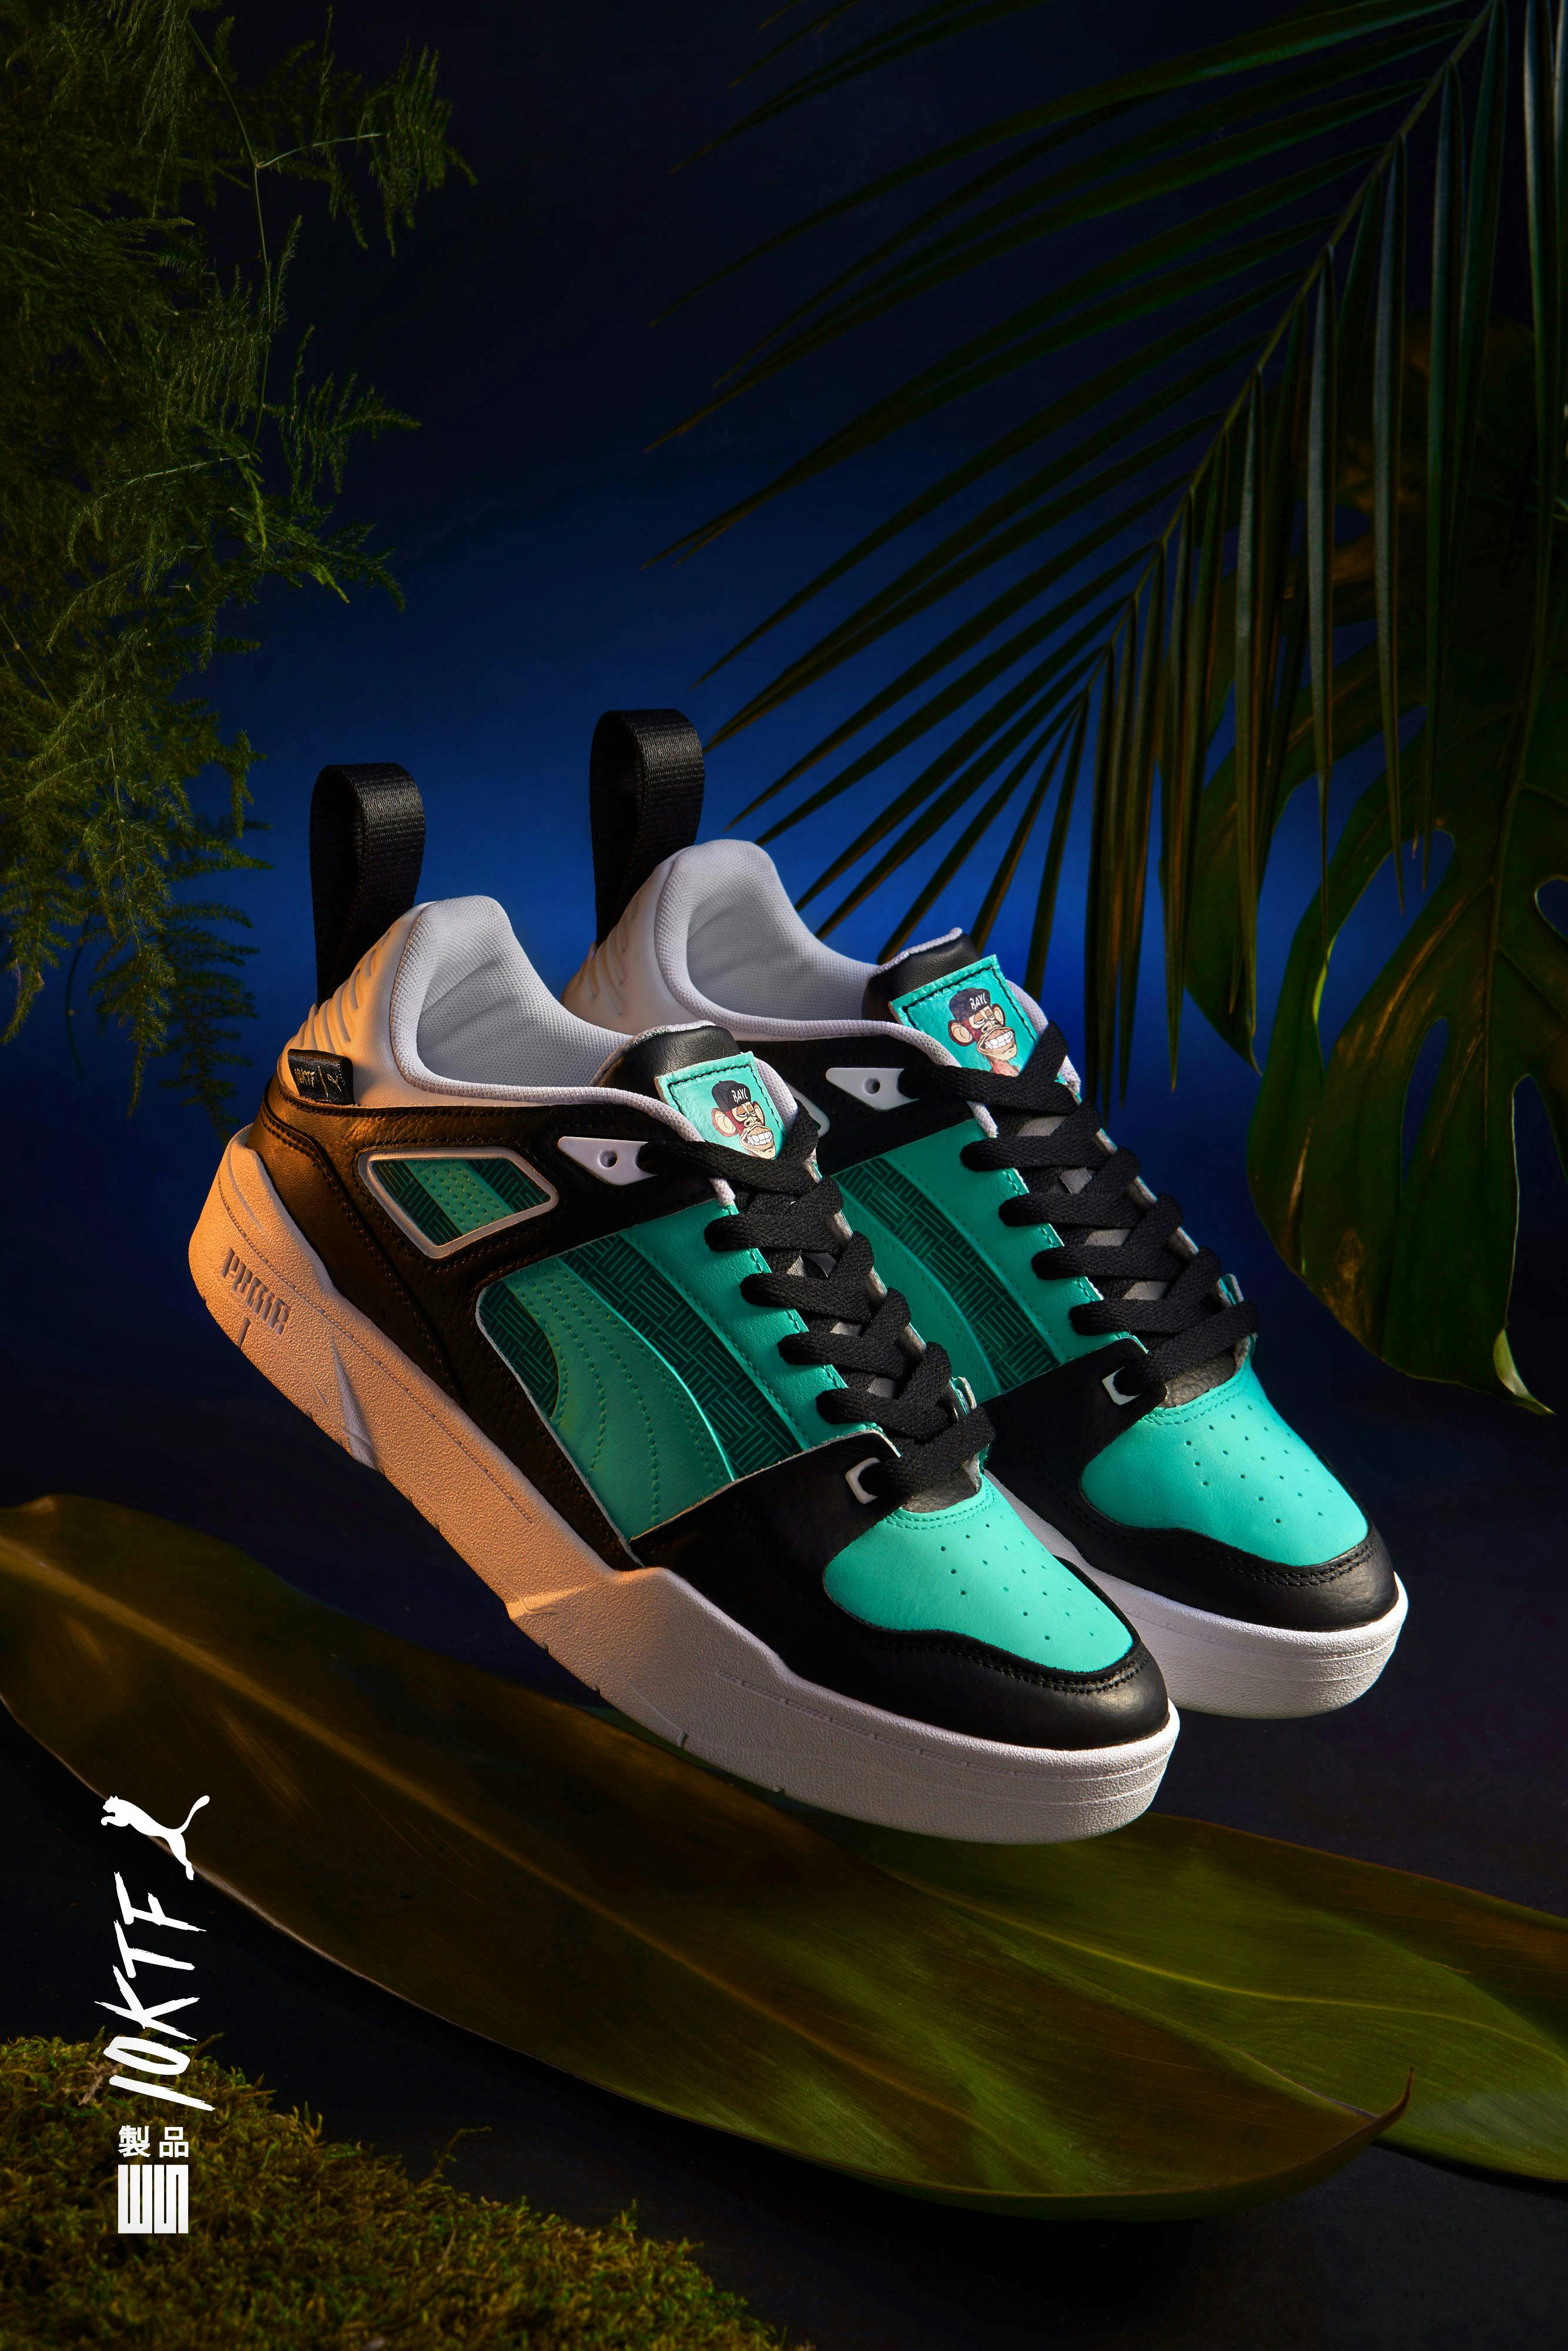 Is Louis Vuitton Copying the Puma Slipstream? 